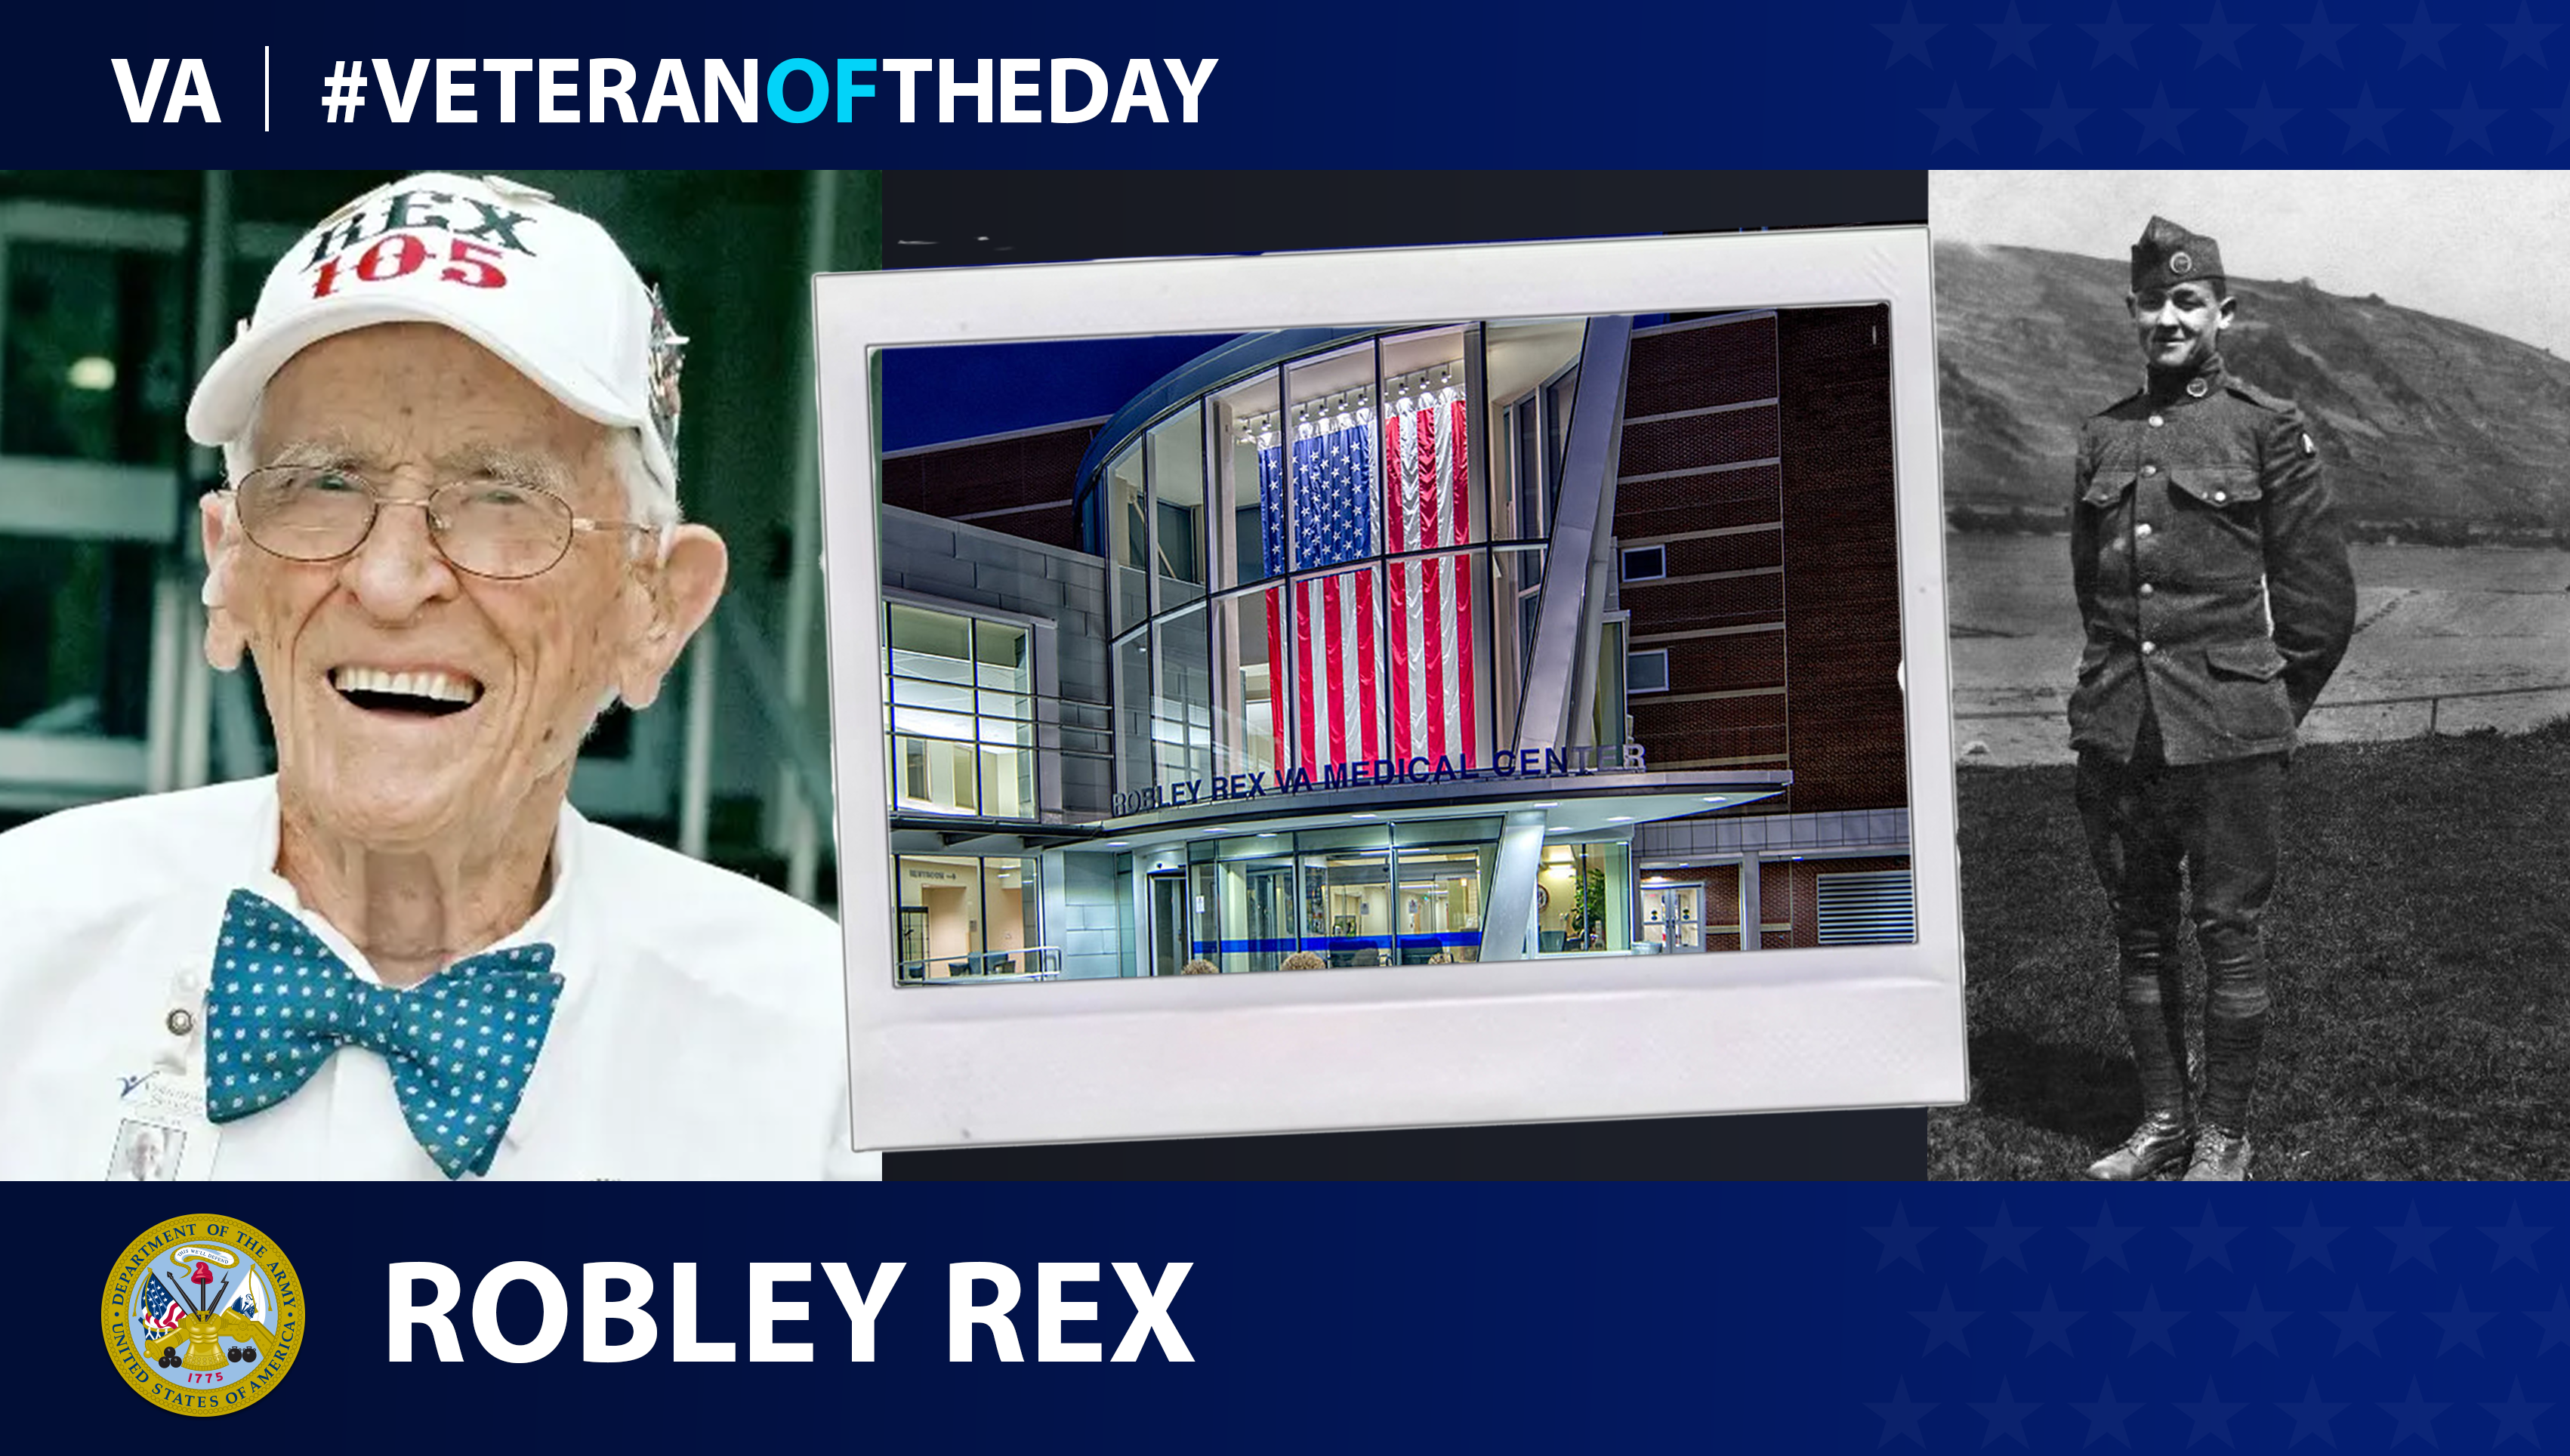 Army Veteran Robley Rex is today’s Veteran of the Day.